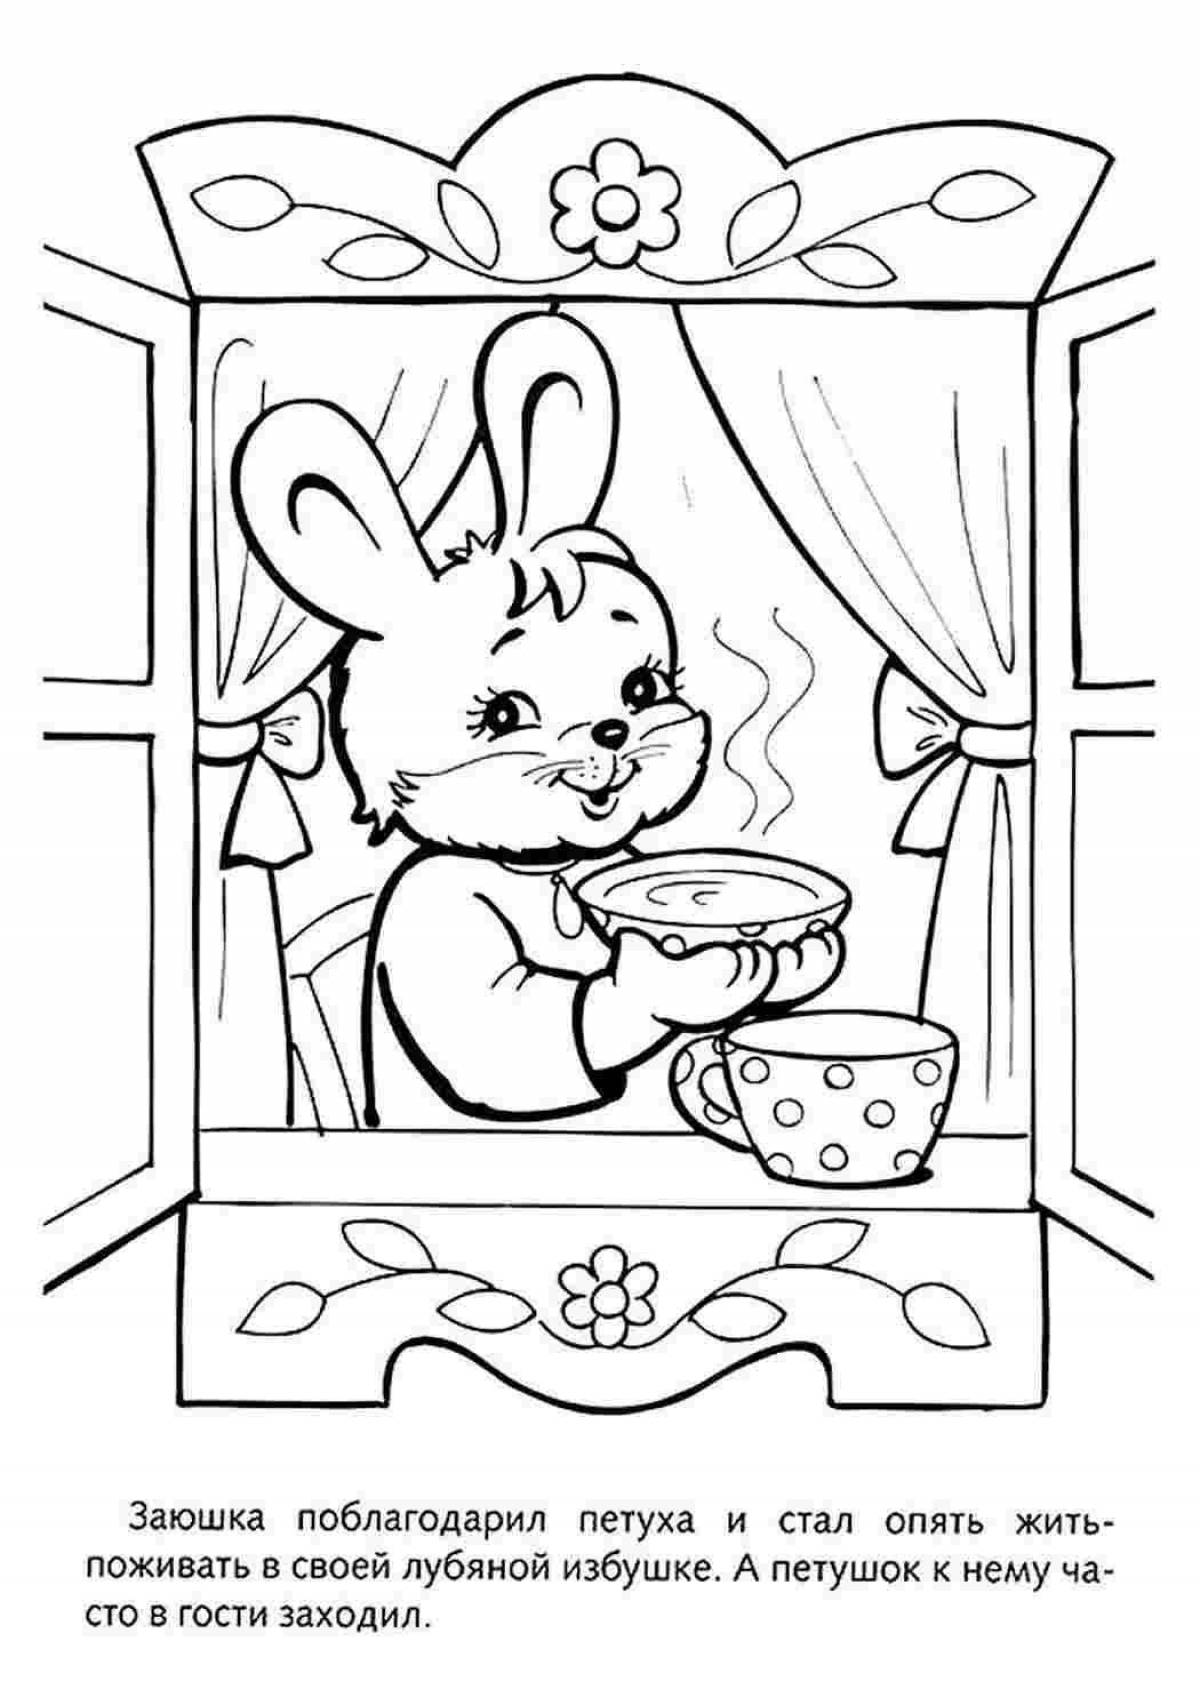 Coloring page charming hare hut